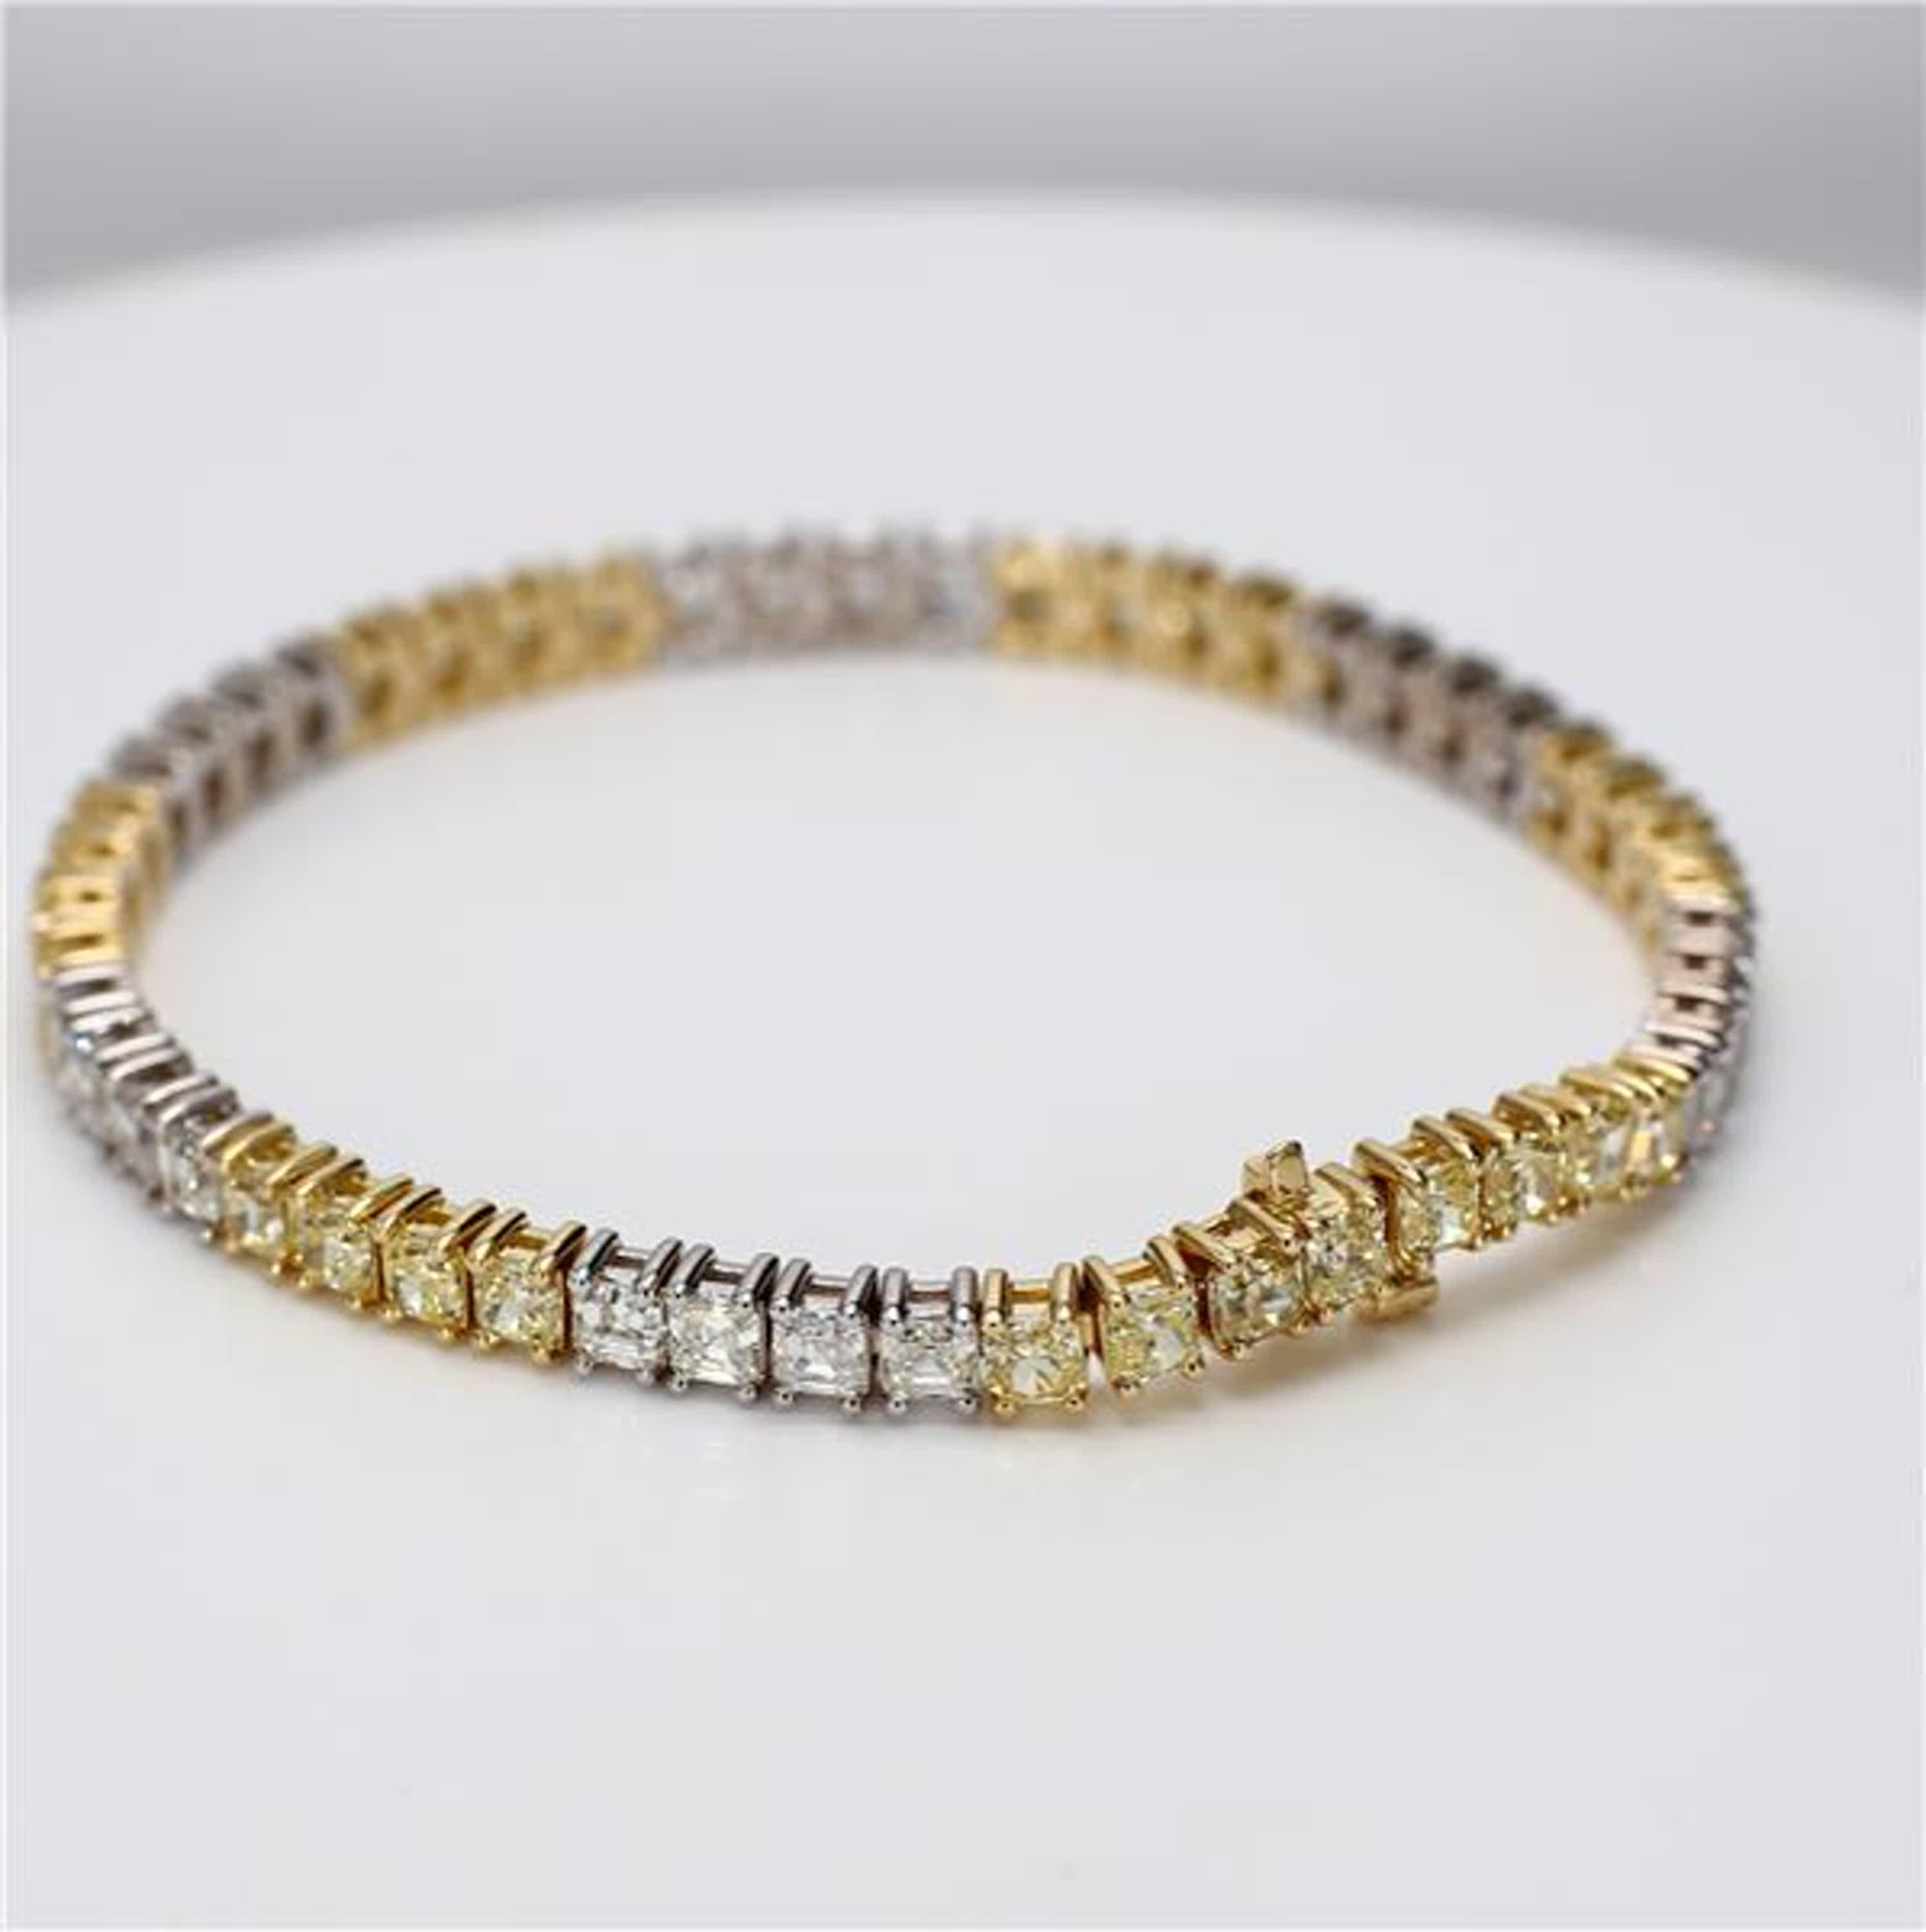 Cushion Cut Natural Yellow Cushion and White Diamond 11.54 Carat TW Gold Tennis Bracelet For Sale